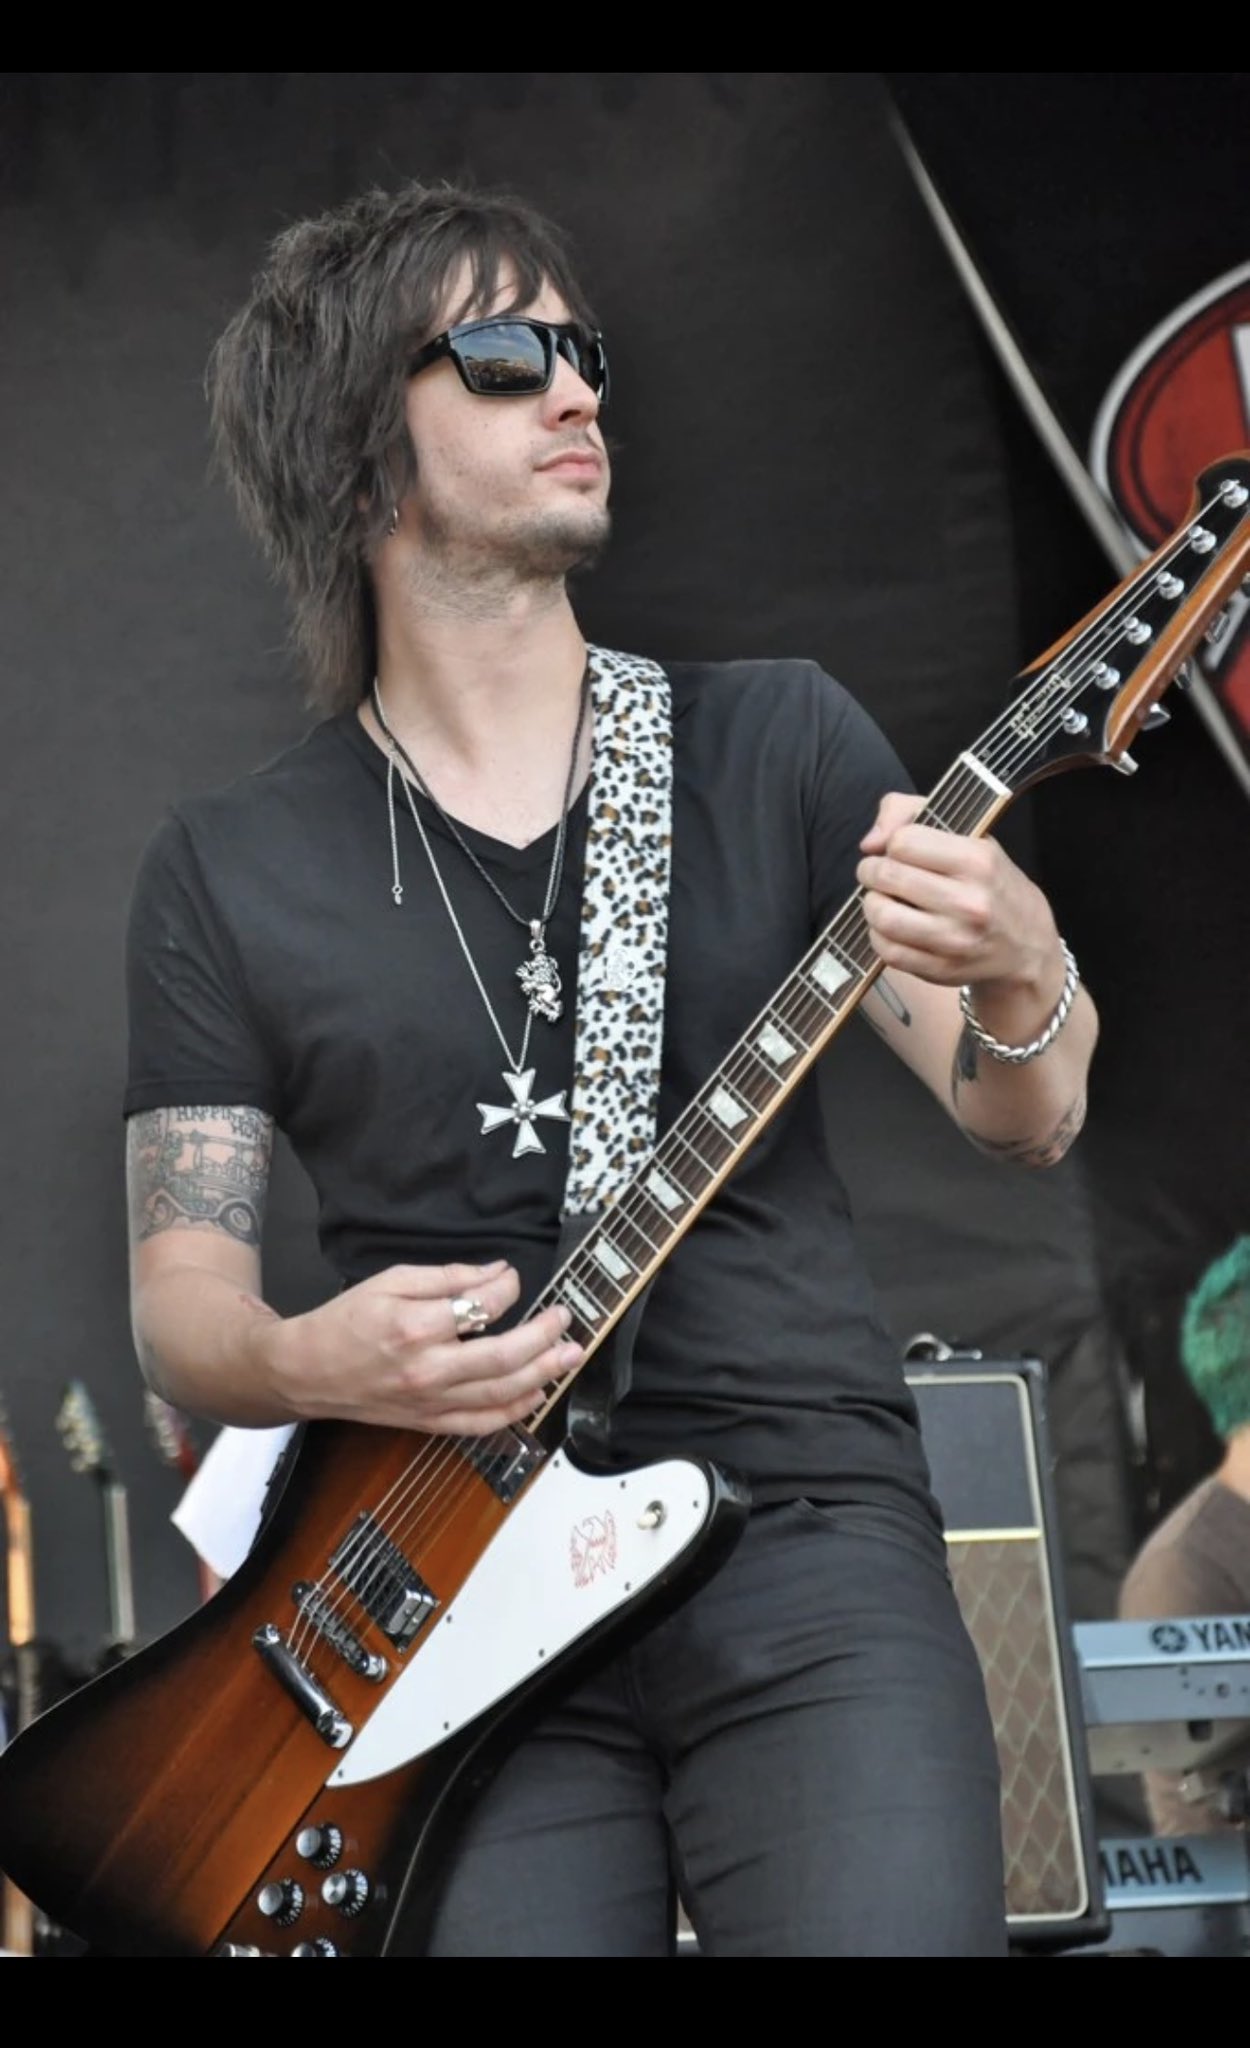 Happy Birthday to The All-American Rejects guitarist Nick Wheeler, born on this day in 1982  